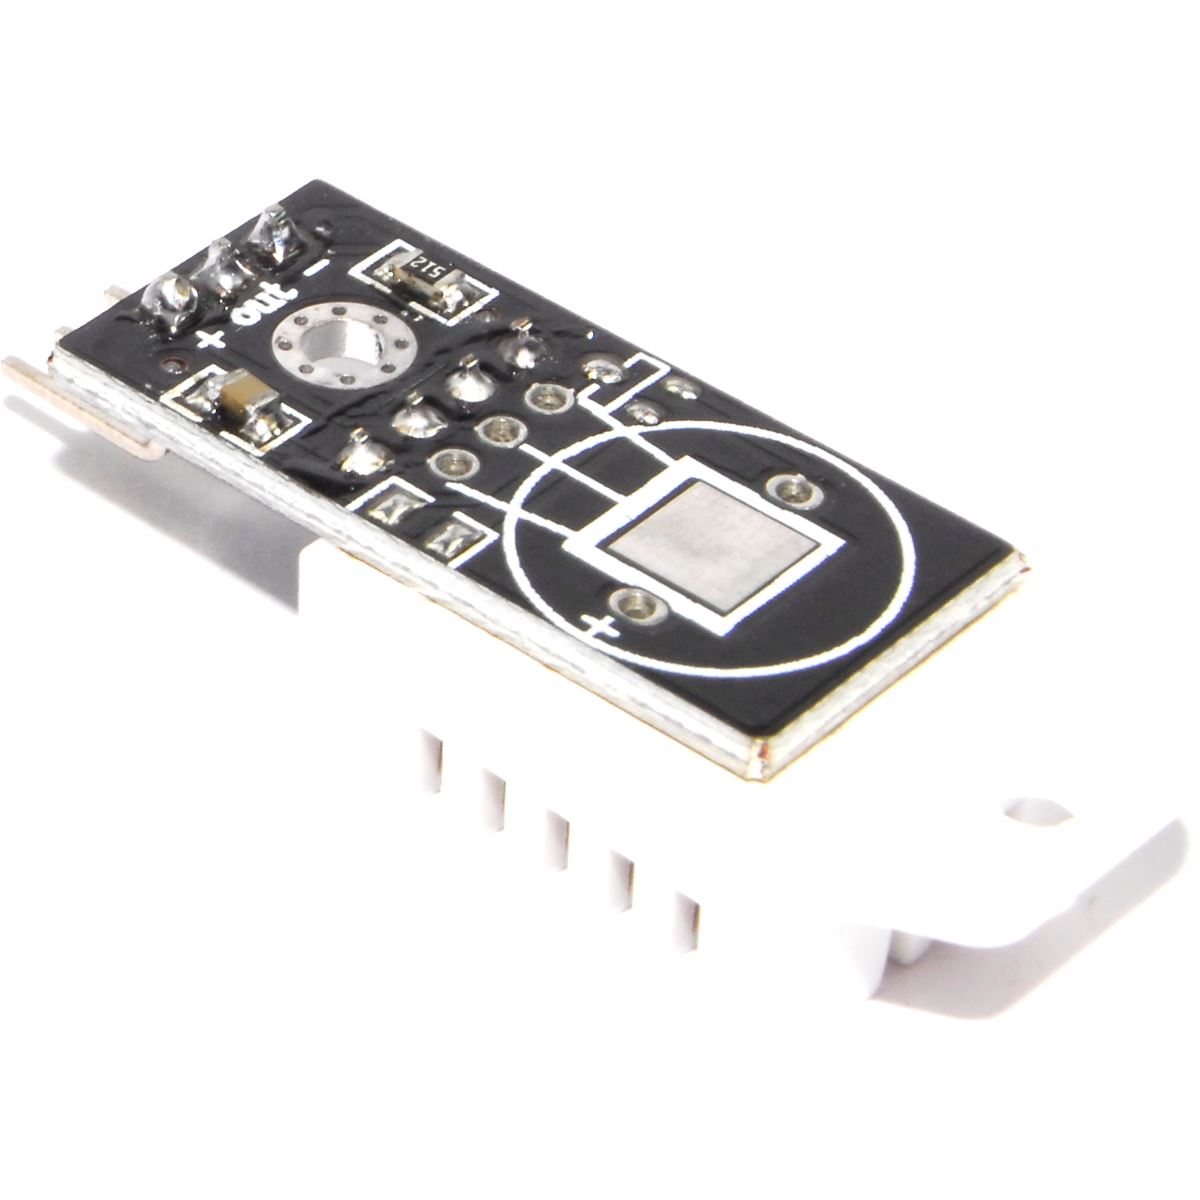 DHT22 Temperature and Humidity Sensor Module Arduino AM2302 – Flux Workshop